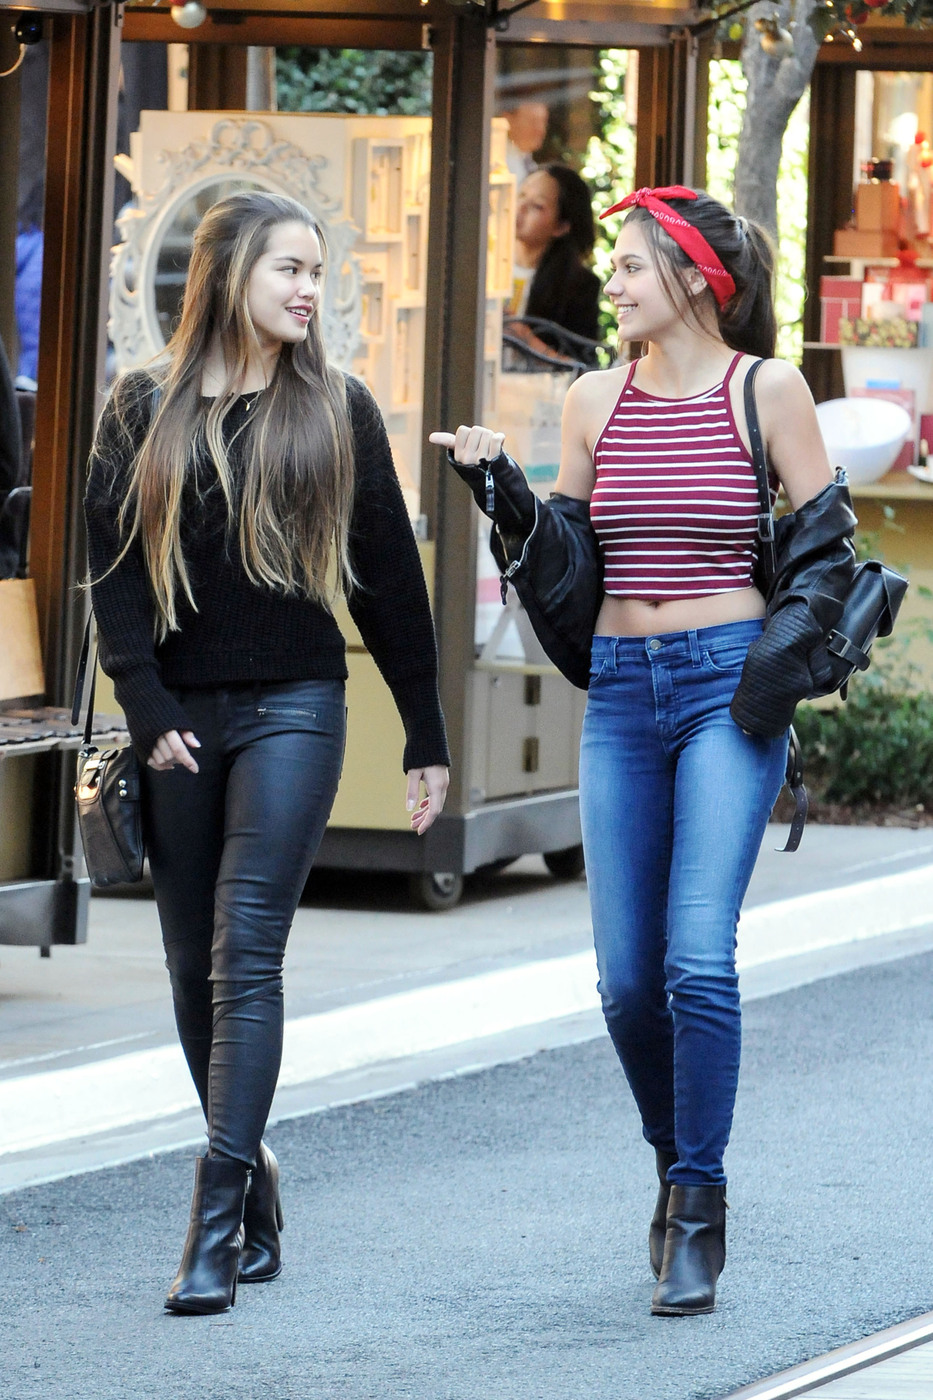 Paris Berelc spotted doing some holiday shopping at the Americana